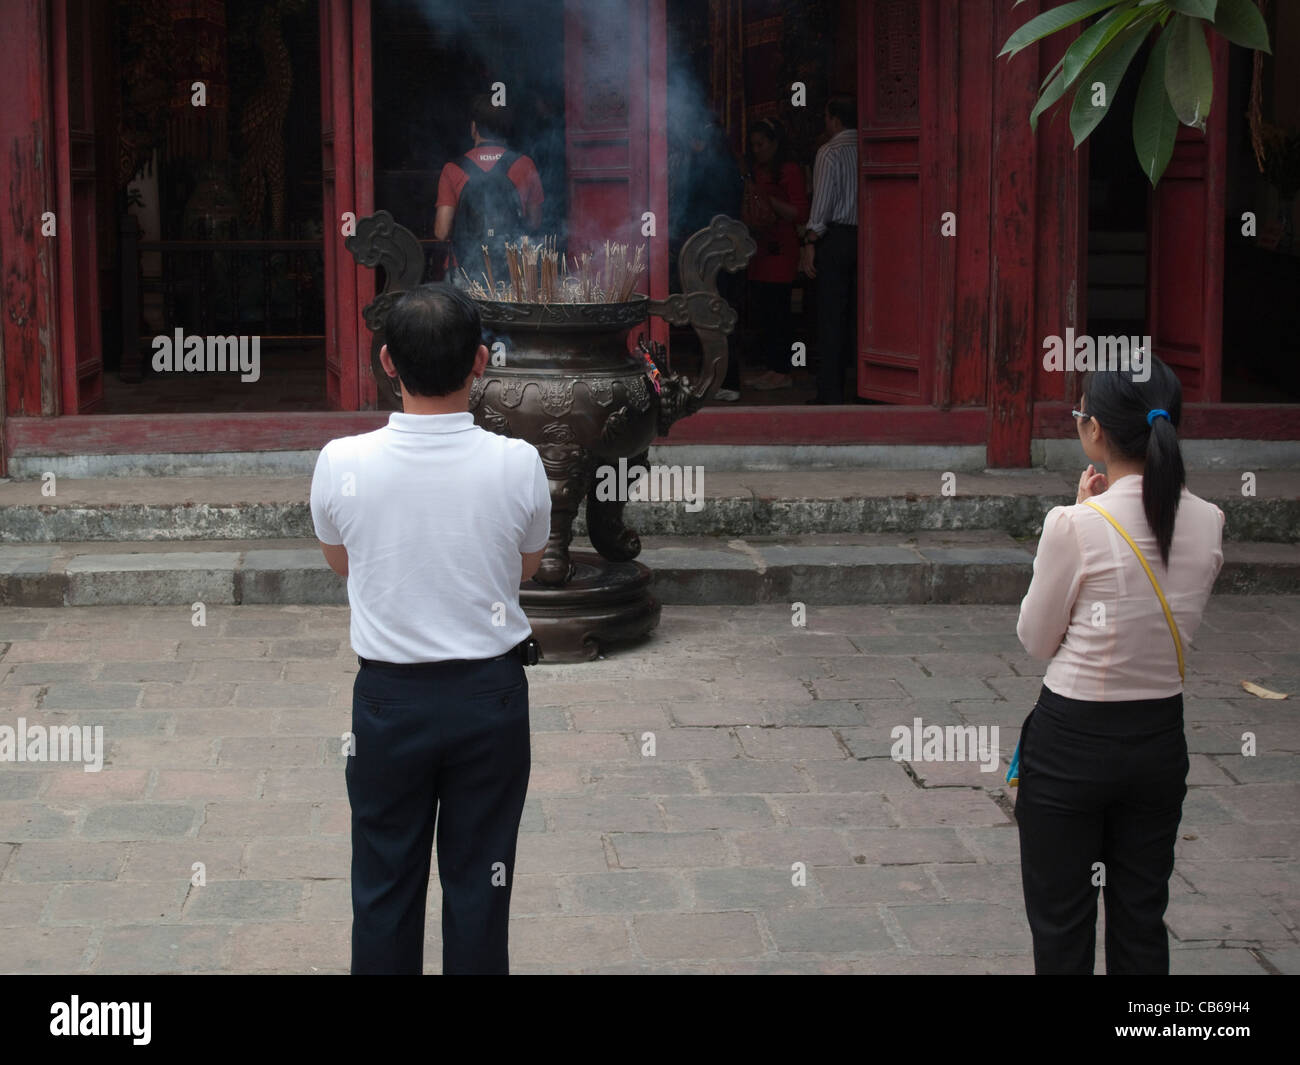 People praying and burning incense at Den Ngoc Son (Temple of the Jade Mound) Buddhist temple in Hanoi, Vietnam Stock Photo